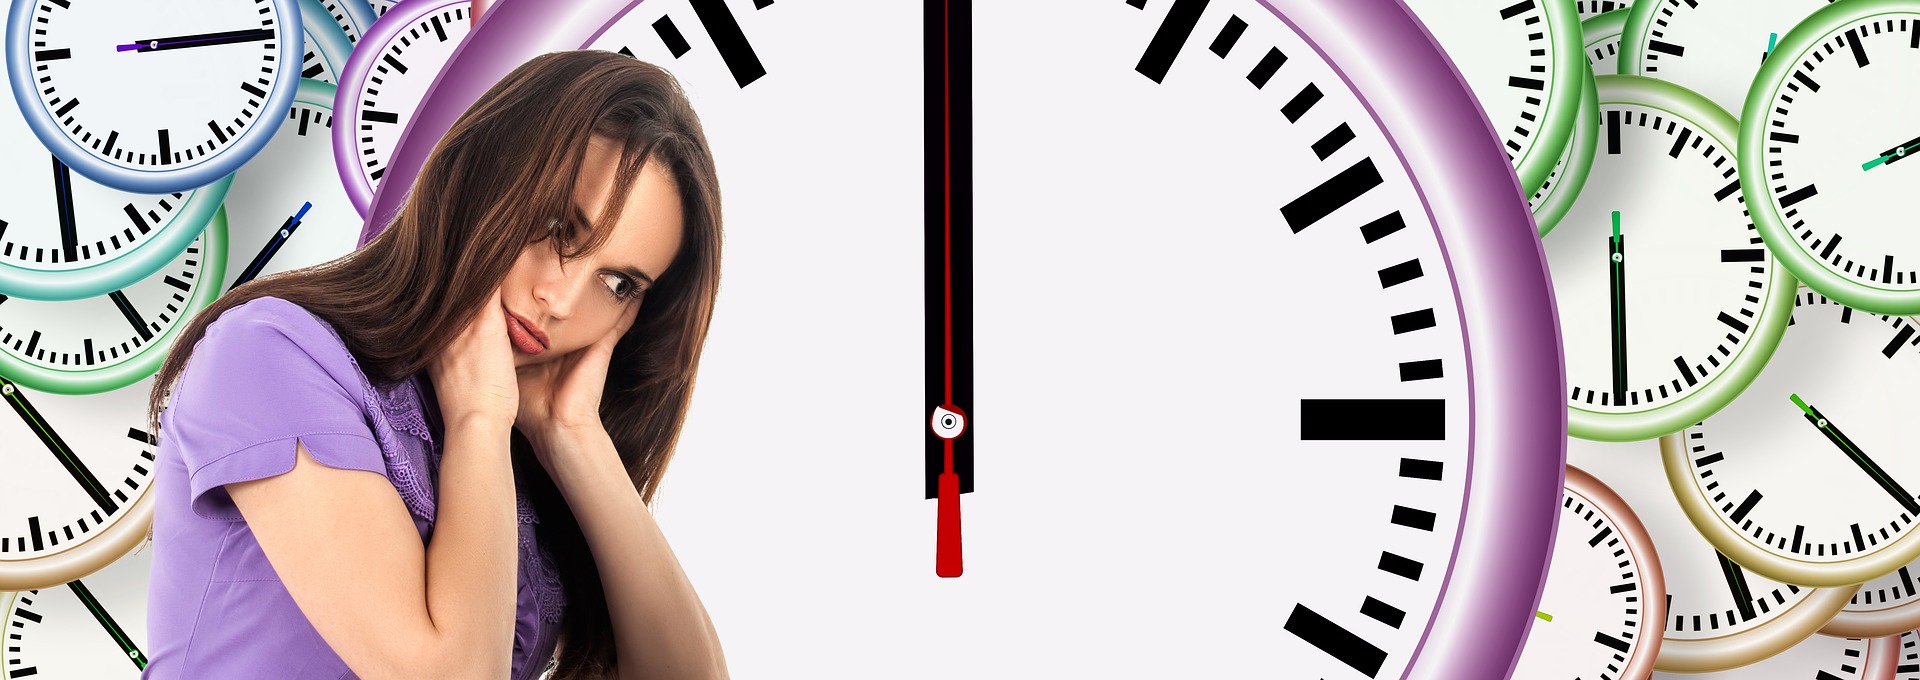 ﻿Woman covering her ears and trying to ignore numerous clocks in background